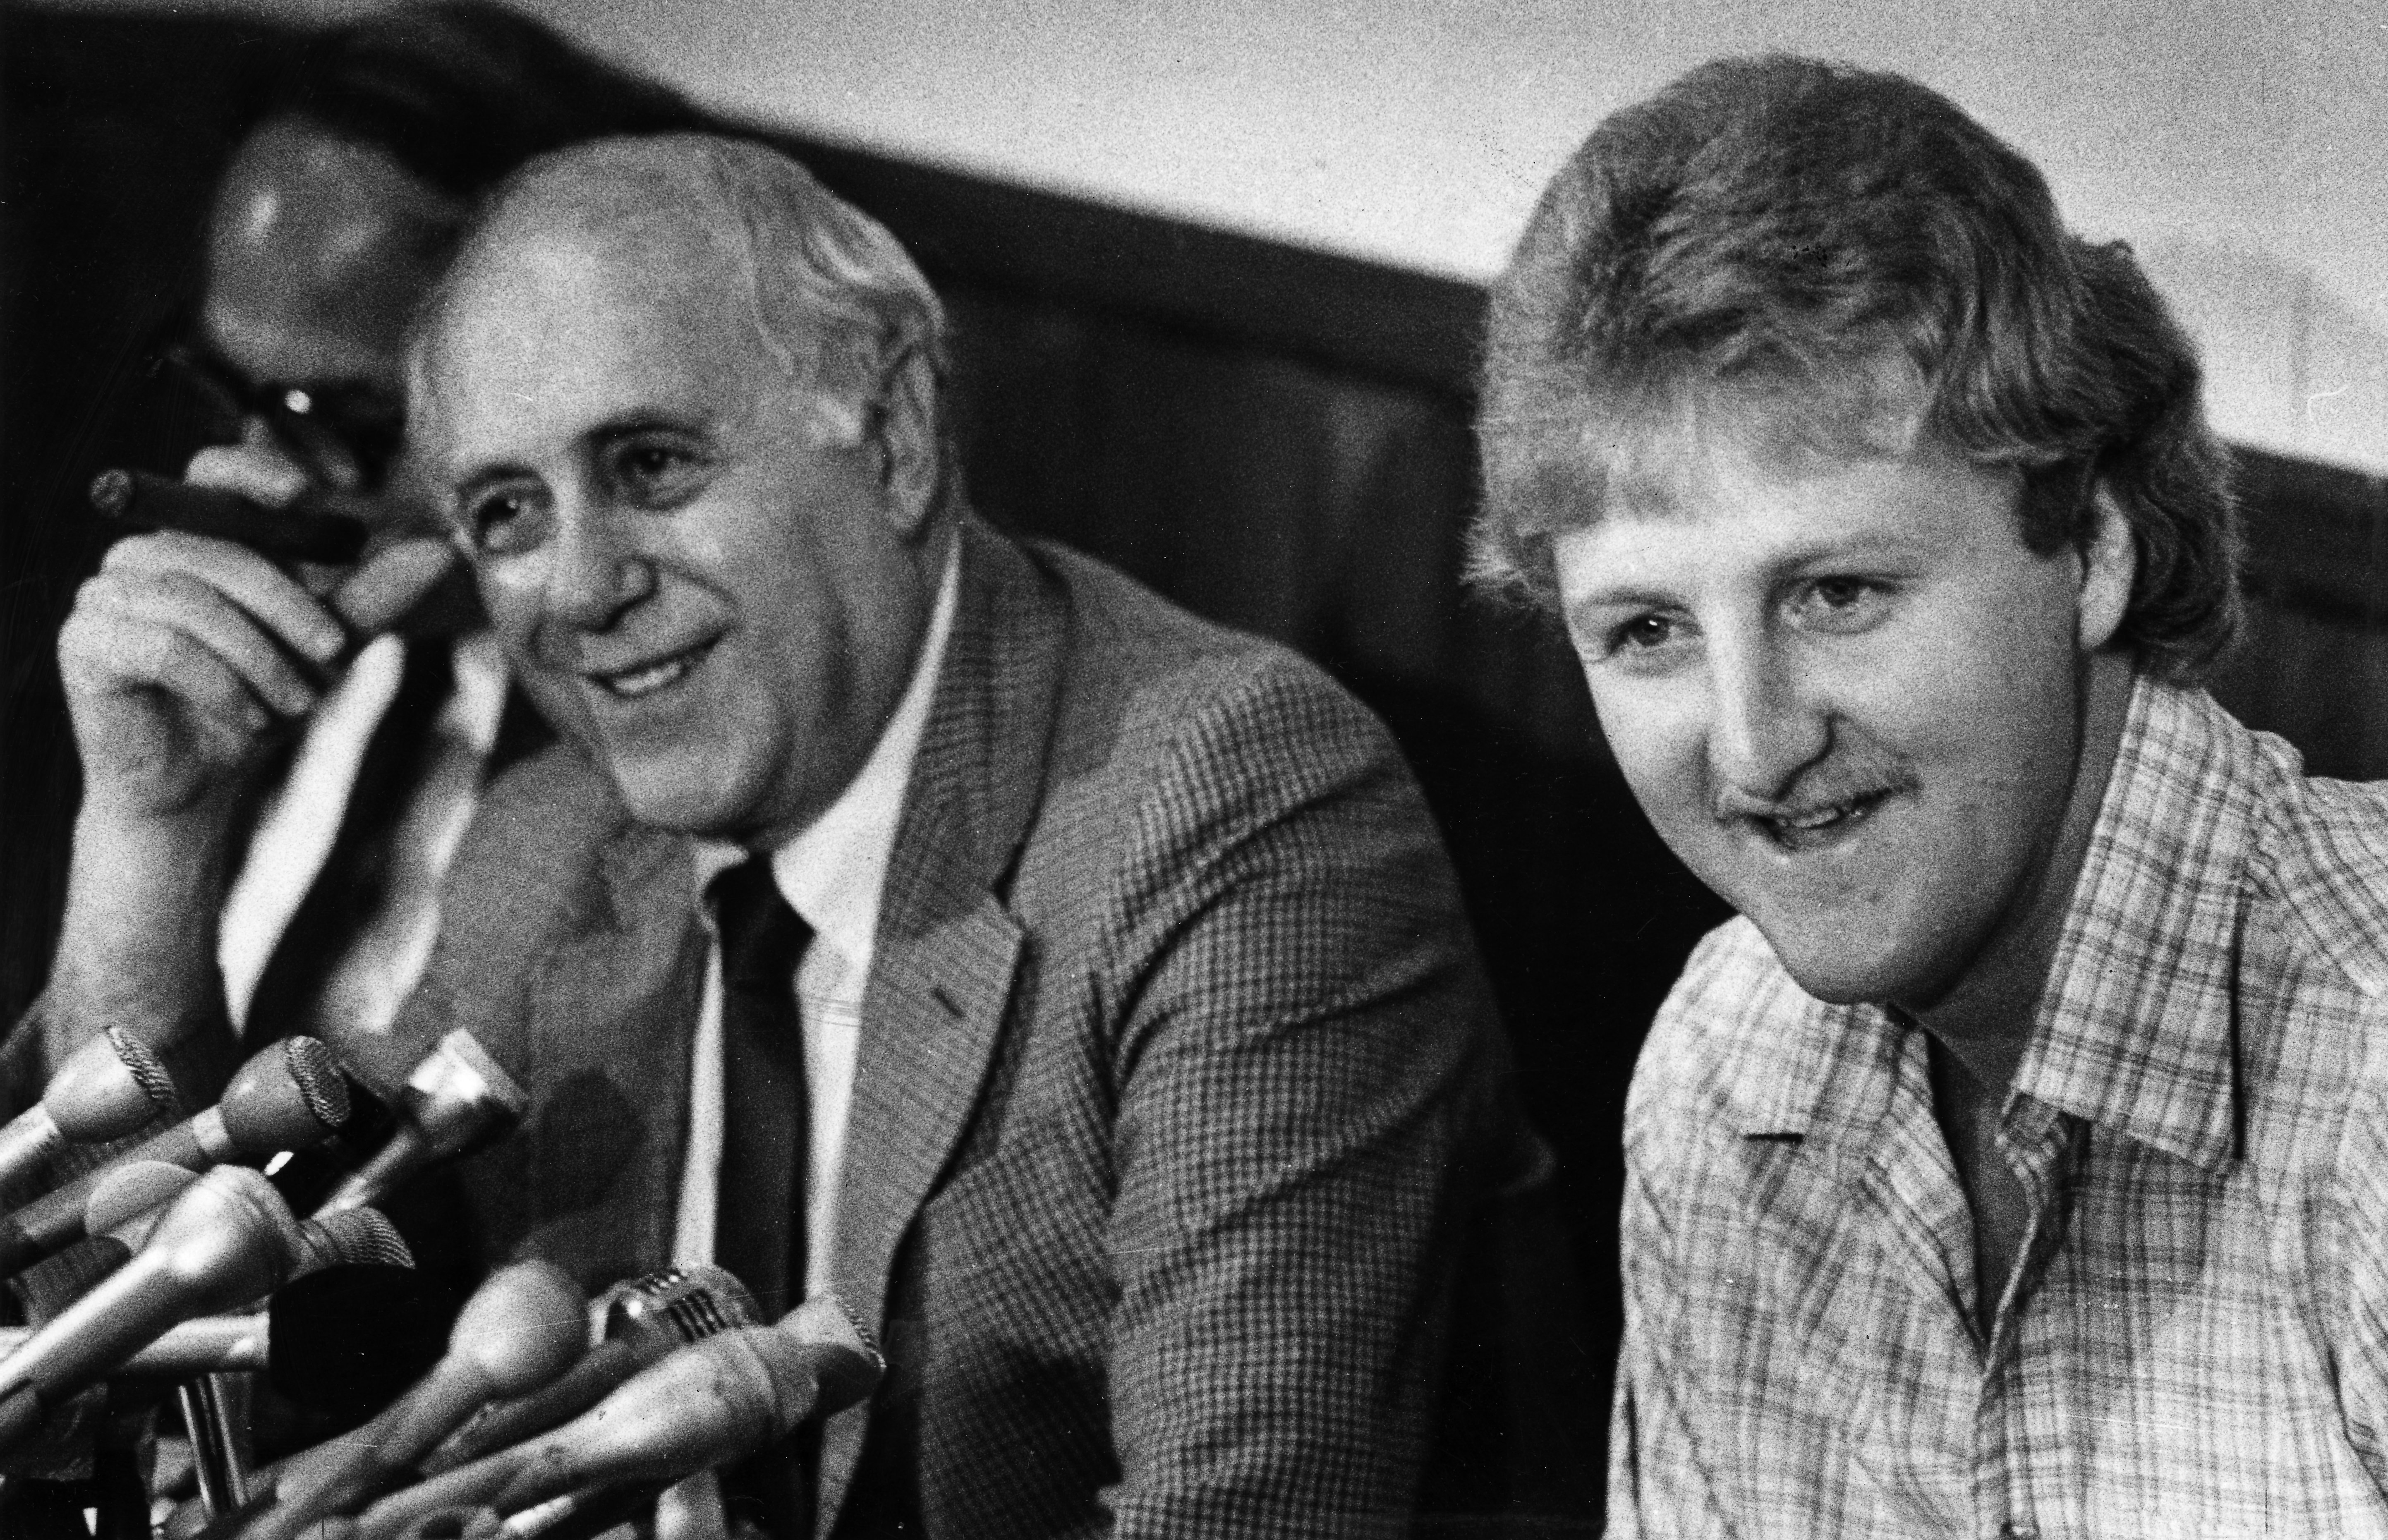 Boston Celtics great Larry Bird (R) answers questions next to Red Auerbach